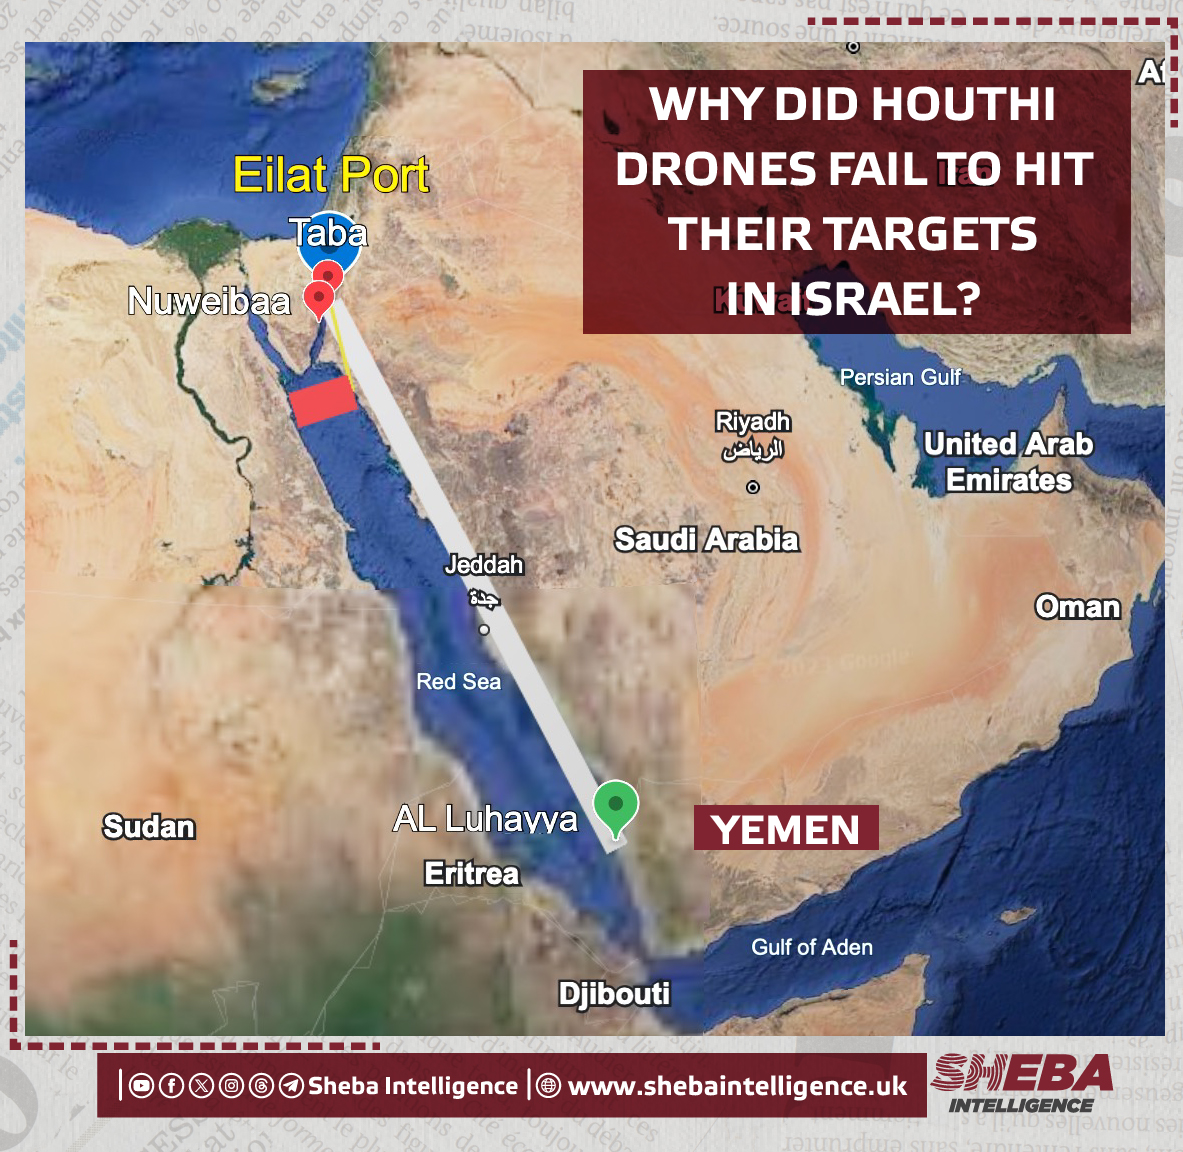 Why Did Houthi Drones Fail to Hit Their Targets in Israel?